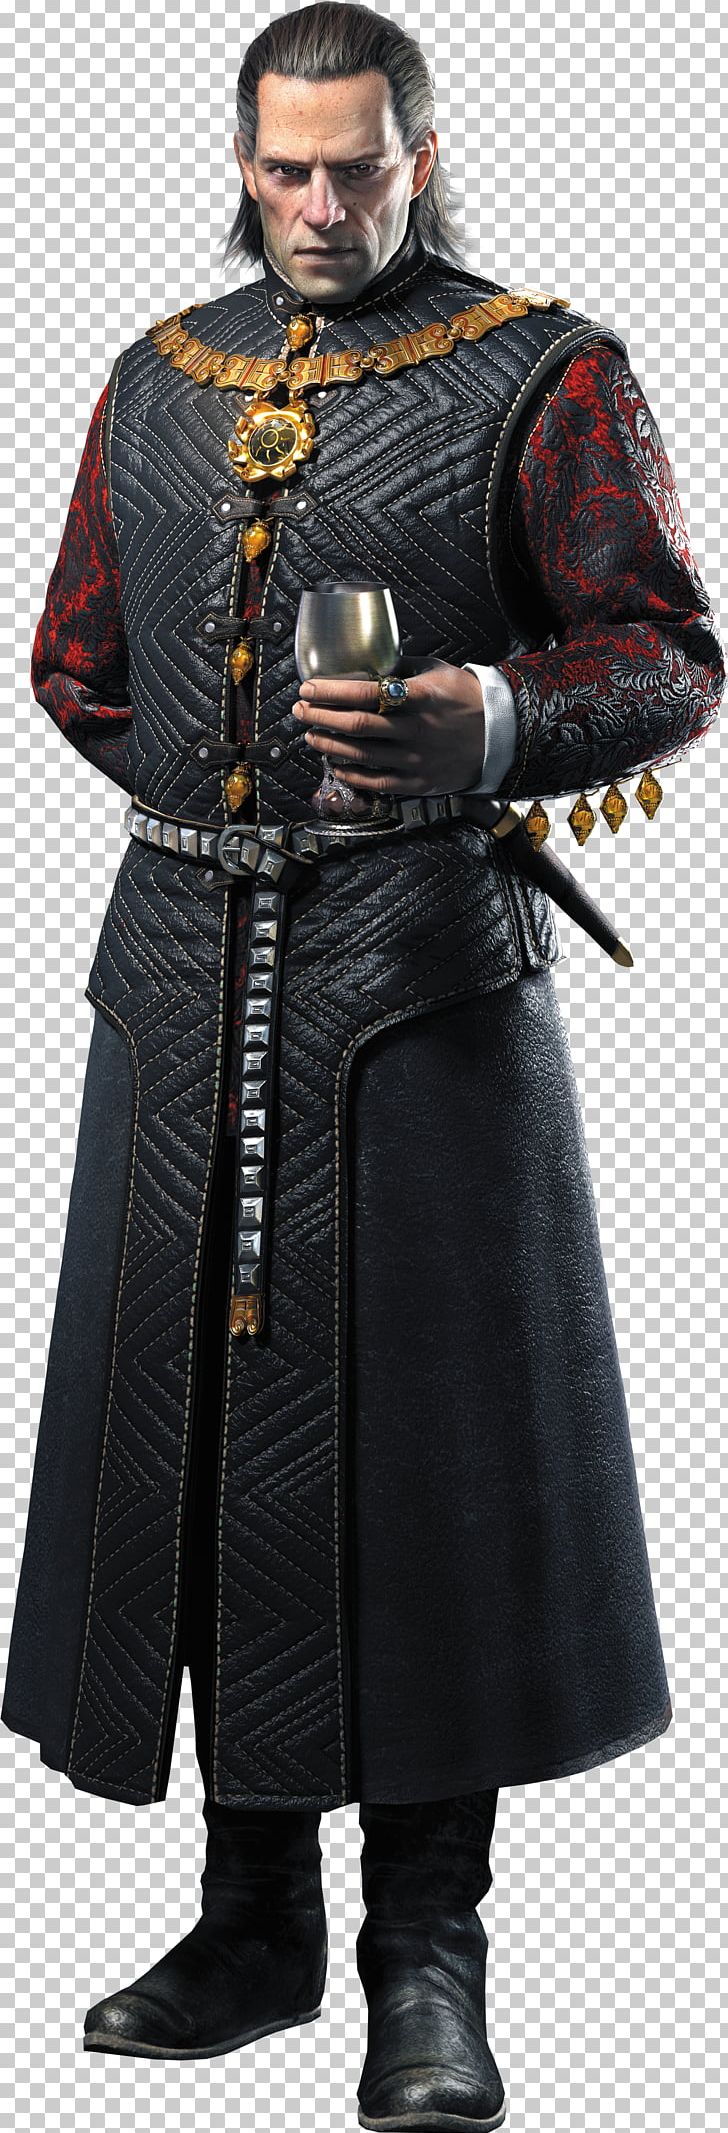 The Witcher 3: Wild Hunt Emhyr Var Emreis The Hexer Geralt Of Rivia PNG, Clipart, Armour, Character, Ciri, Costume, Emhyr Var Emreis Free PNG Download